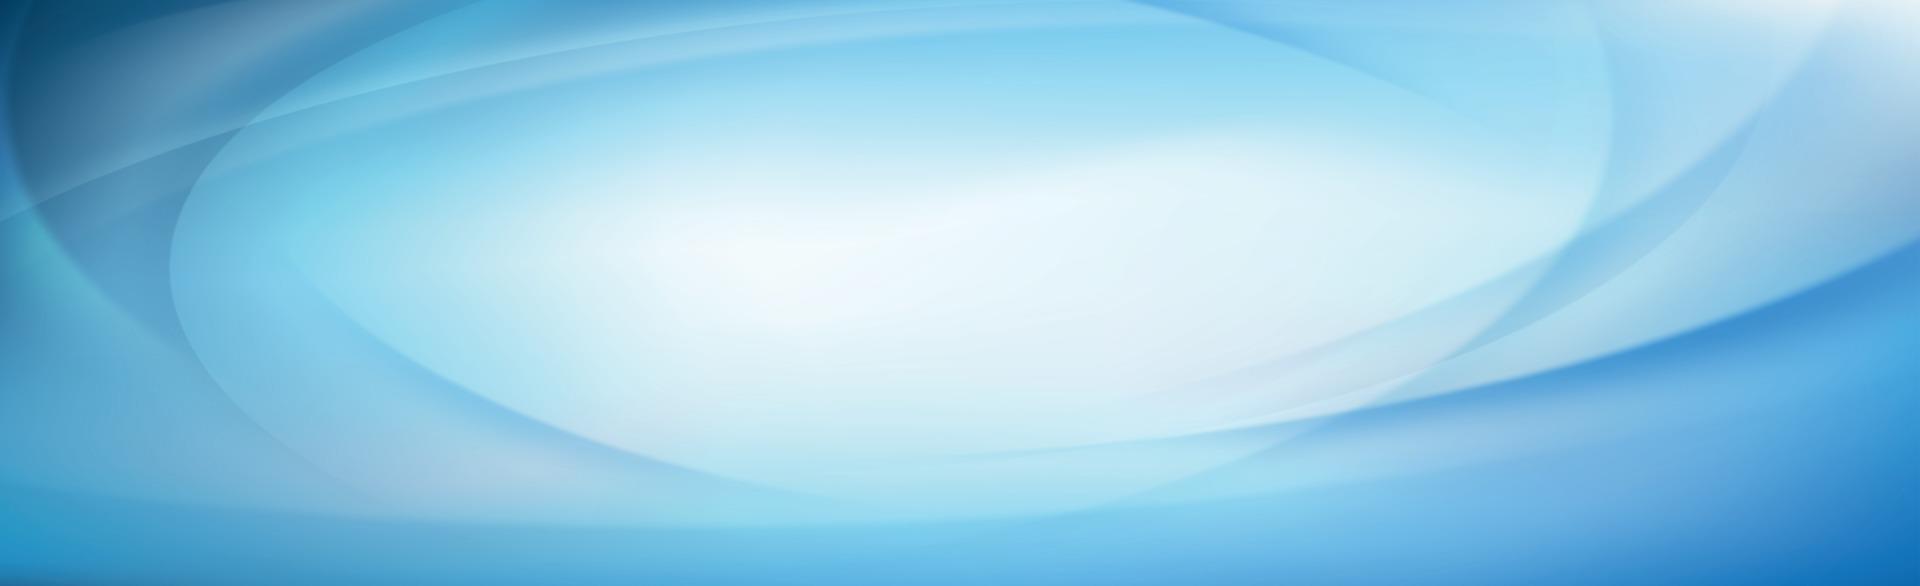 White curved line with blue shades on a white background vector